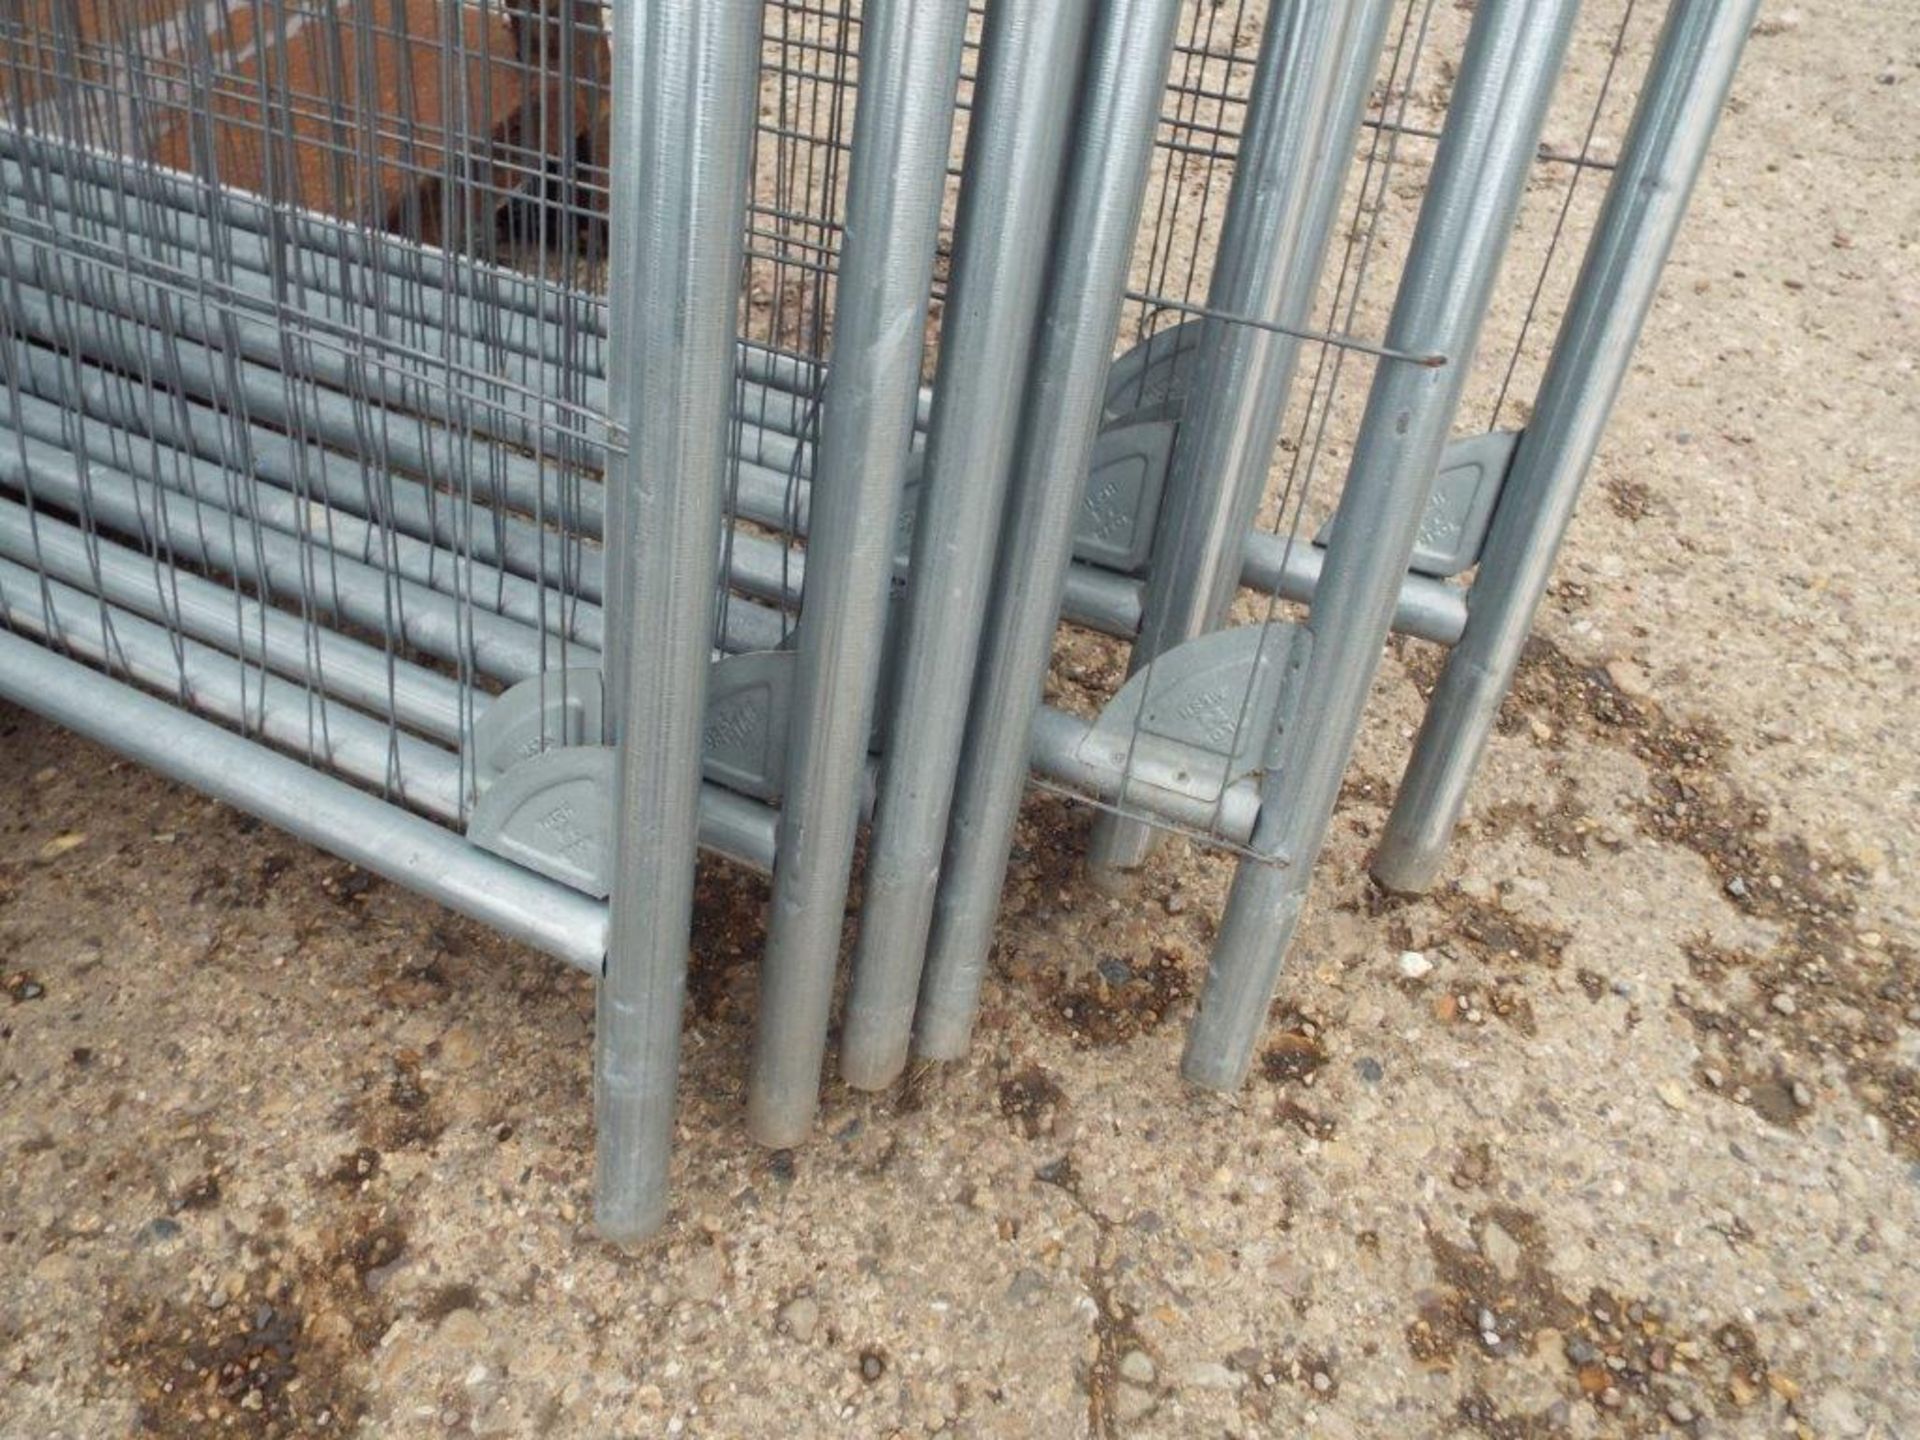 10 x Heras Security Fence Panels with Rubber Block Feet - Image 5 of 6